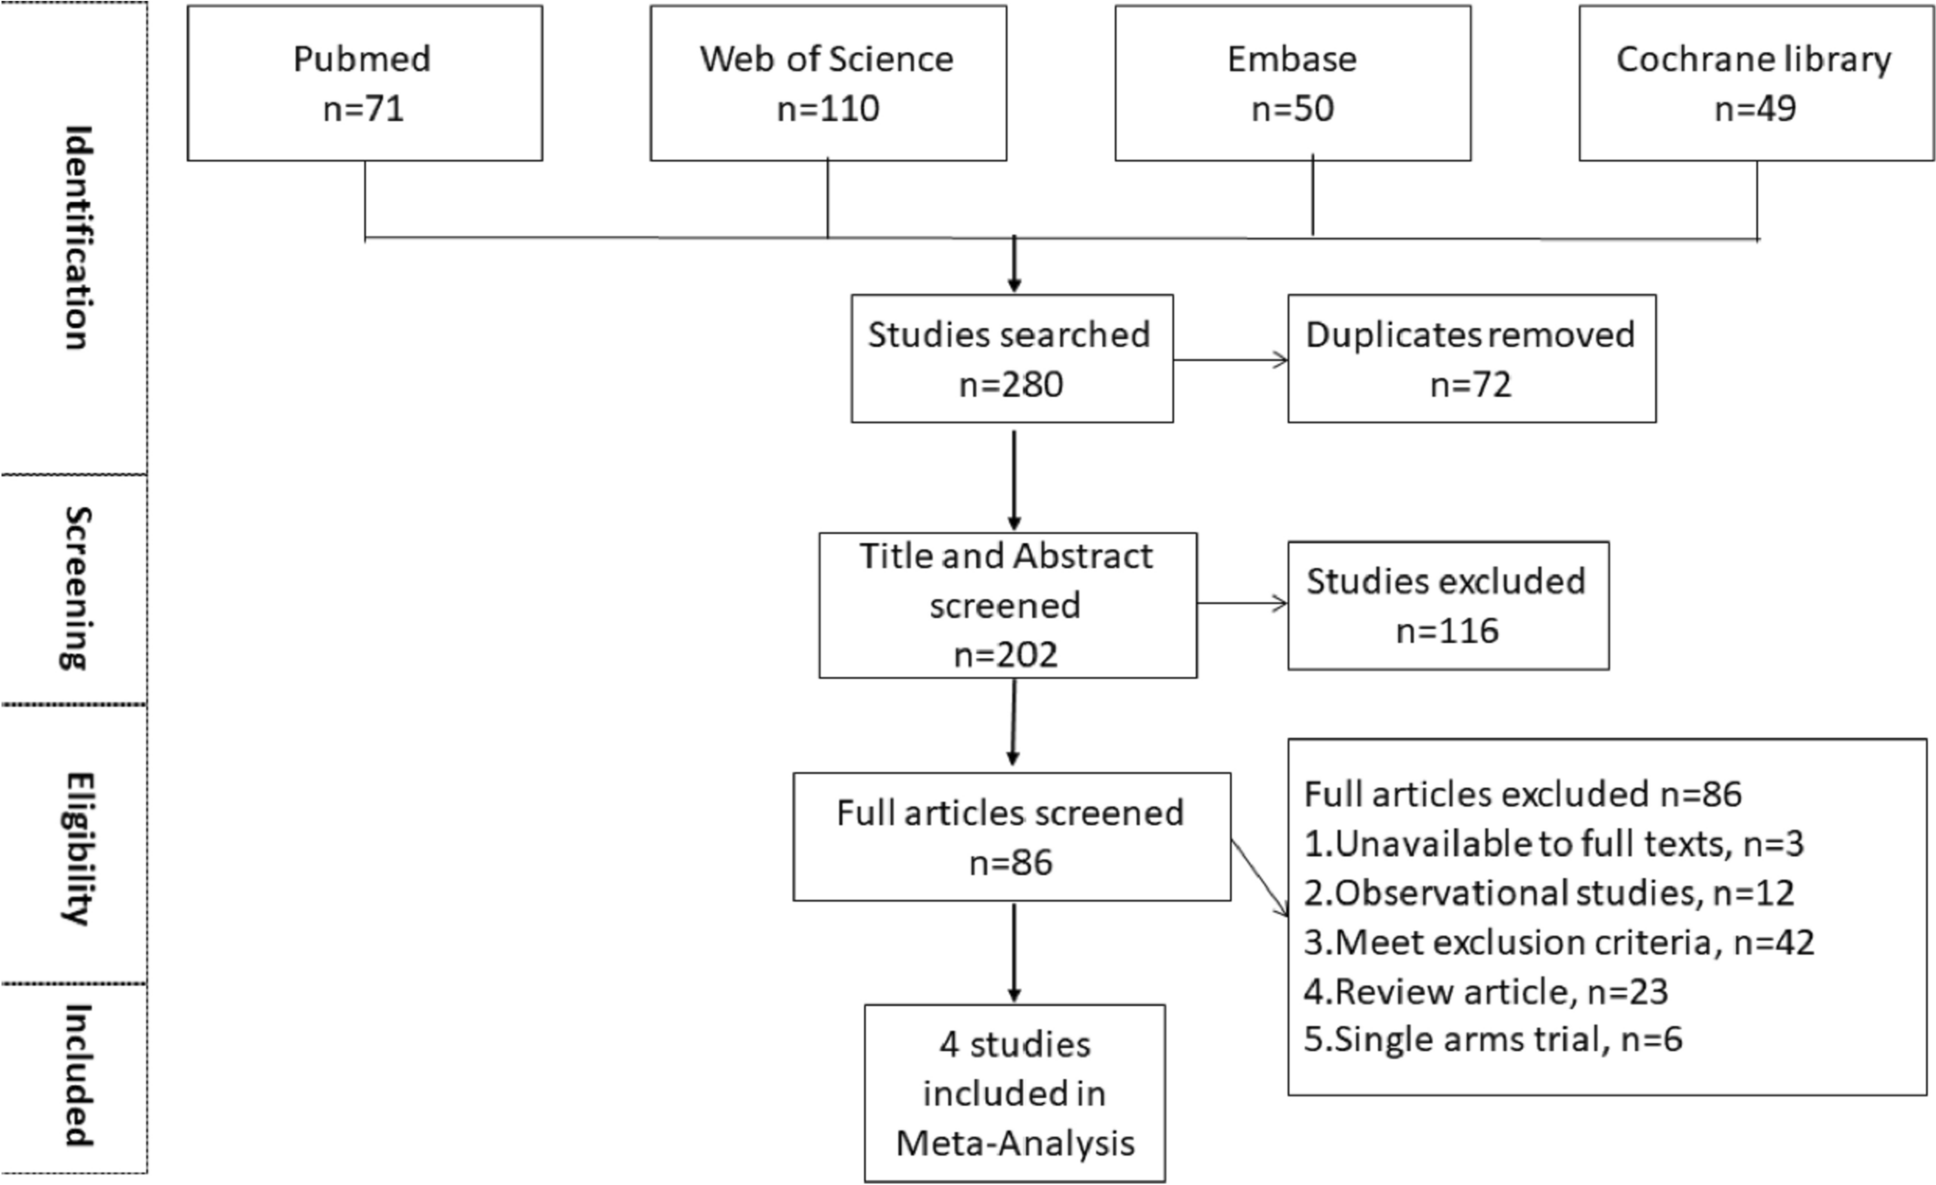 Is percutaneous tibial nerve stimulation (PTNS) effective for fecal incontinence (FI) in adults compared with sham electrical stimulation? A meta-analysis